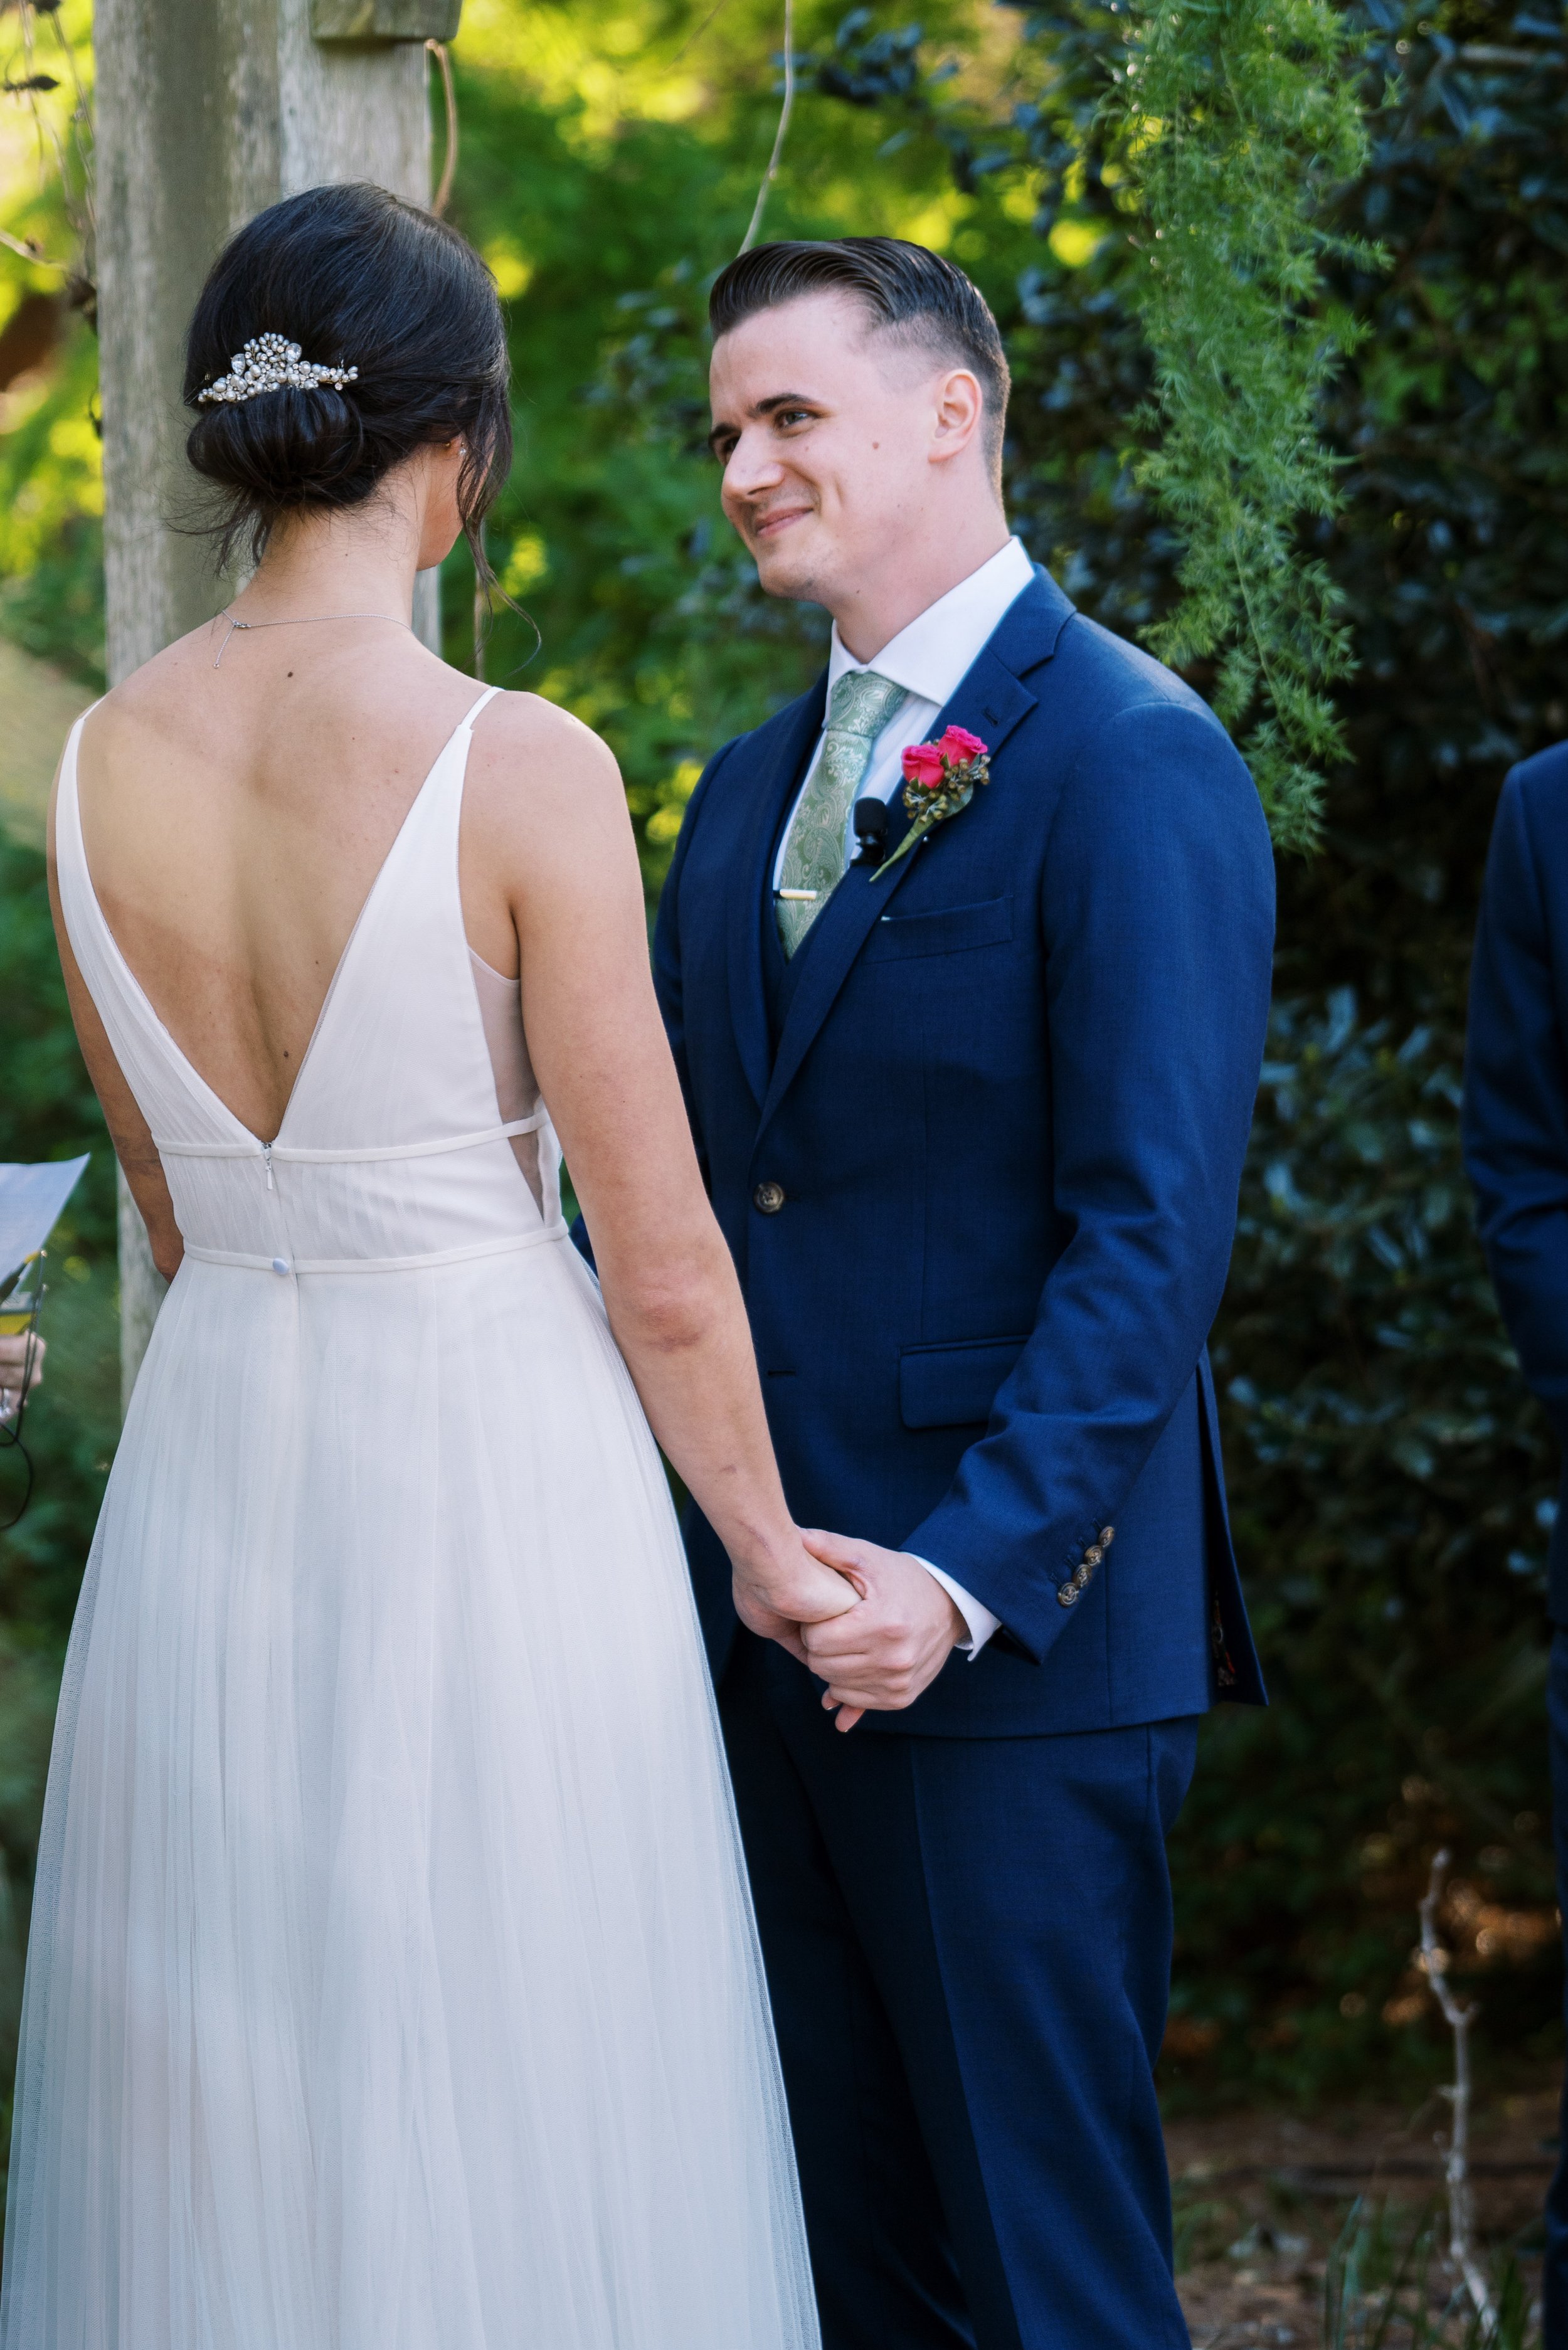 Groom Looks at Bride During Ceremony Vows in Cape Fear Botanical Garden wedding. 